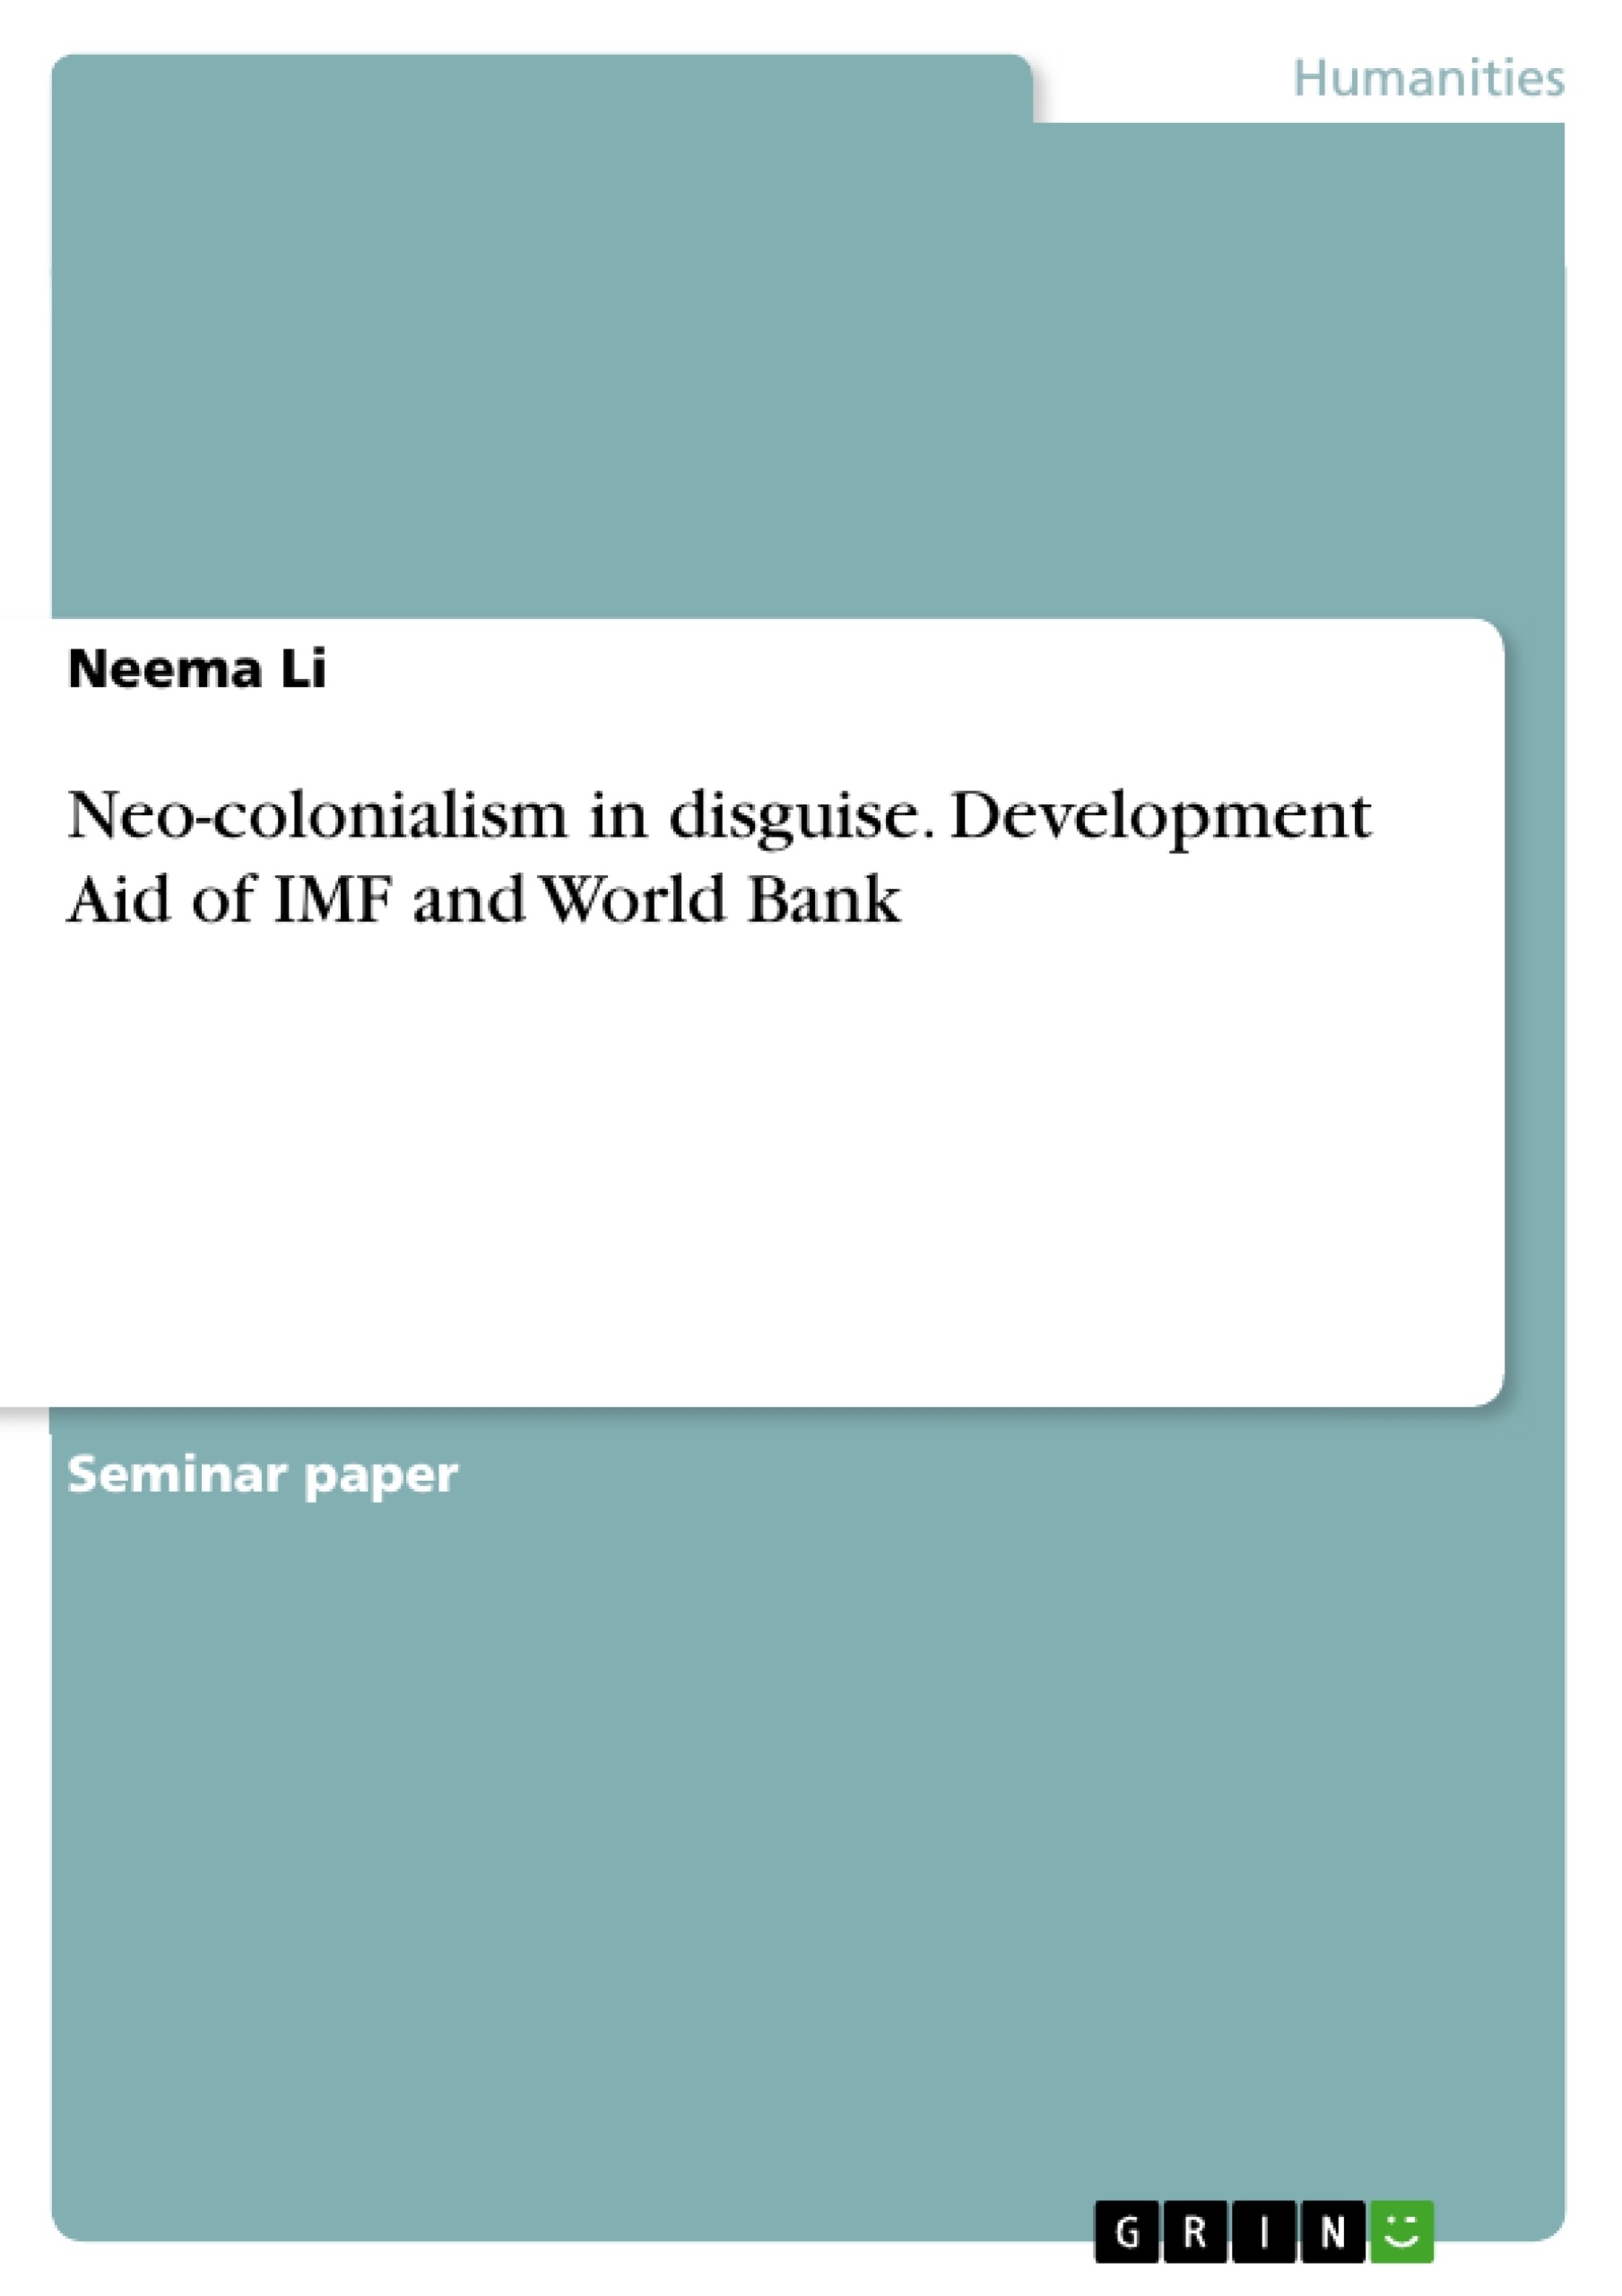 Titre: Neo-colonialism in disguise. Development Aid of IMF and World Bank